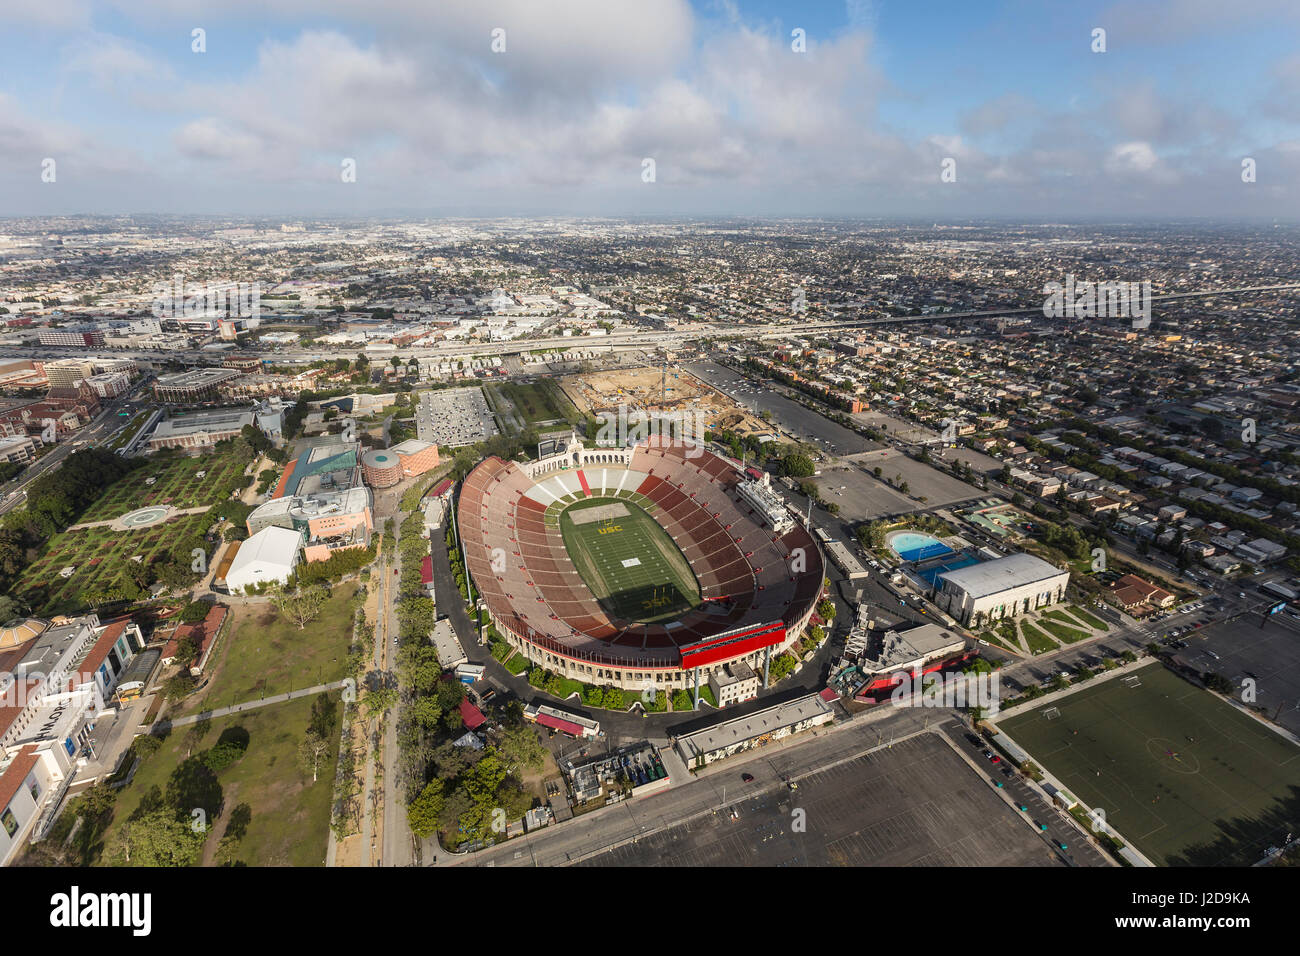 Los Angeles, California, USA - April 12, 2017:  Aerial view of the historic Coliseum stadium near the University of Southern California. Stock Photo